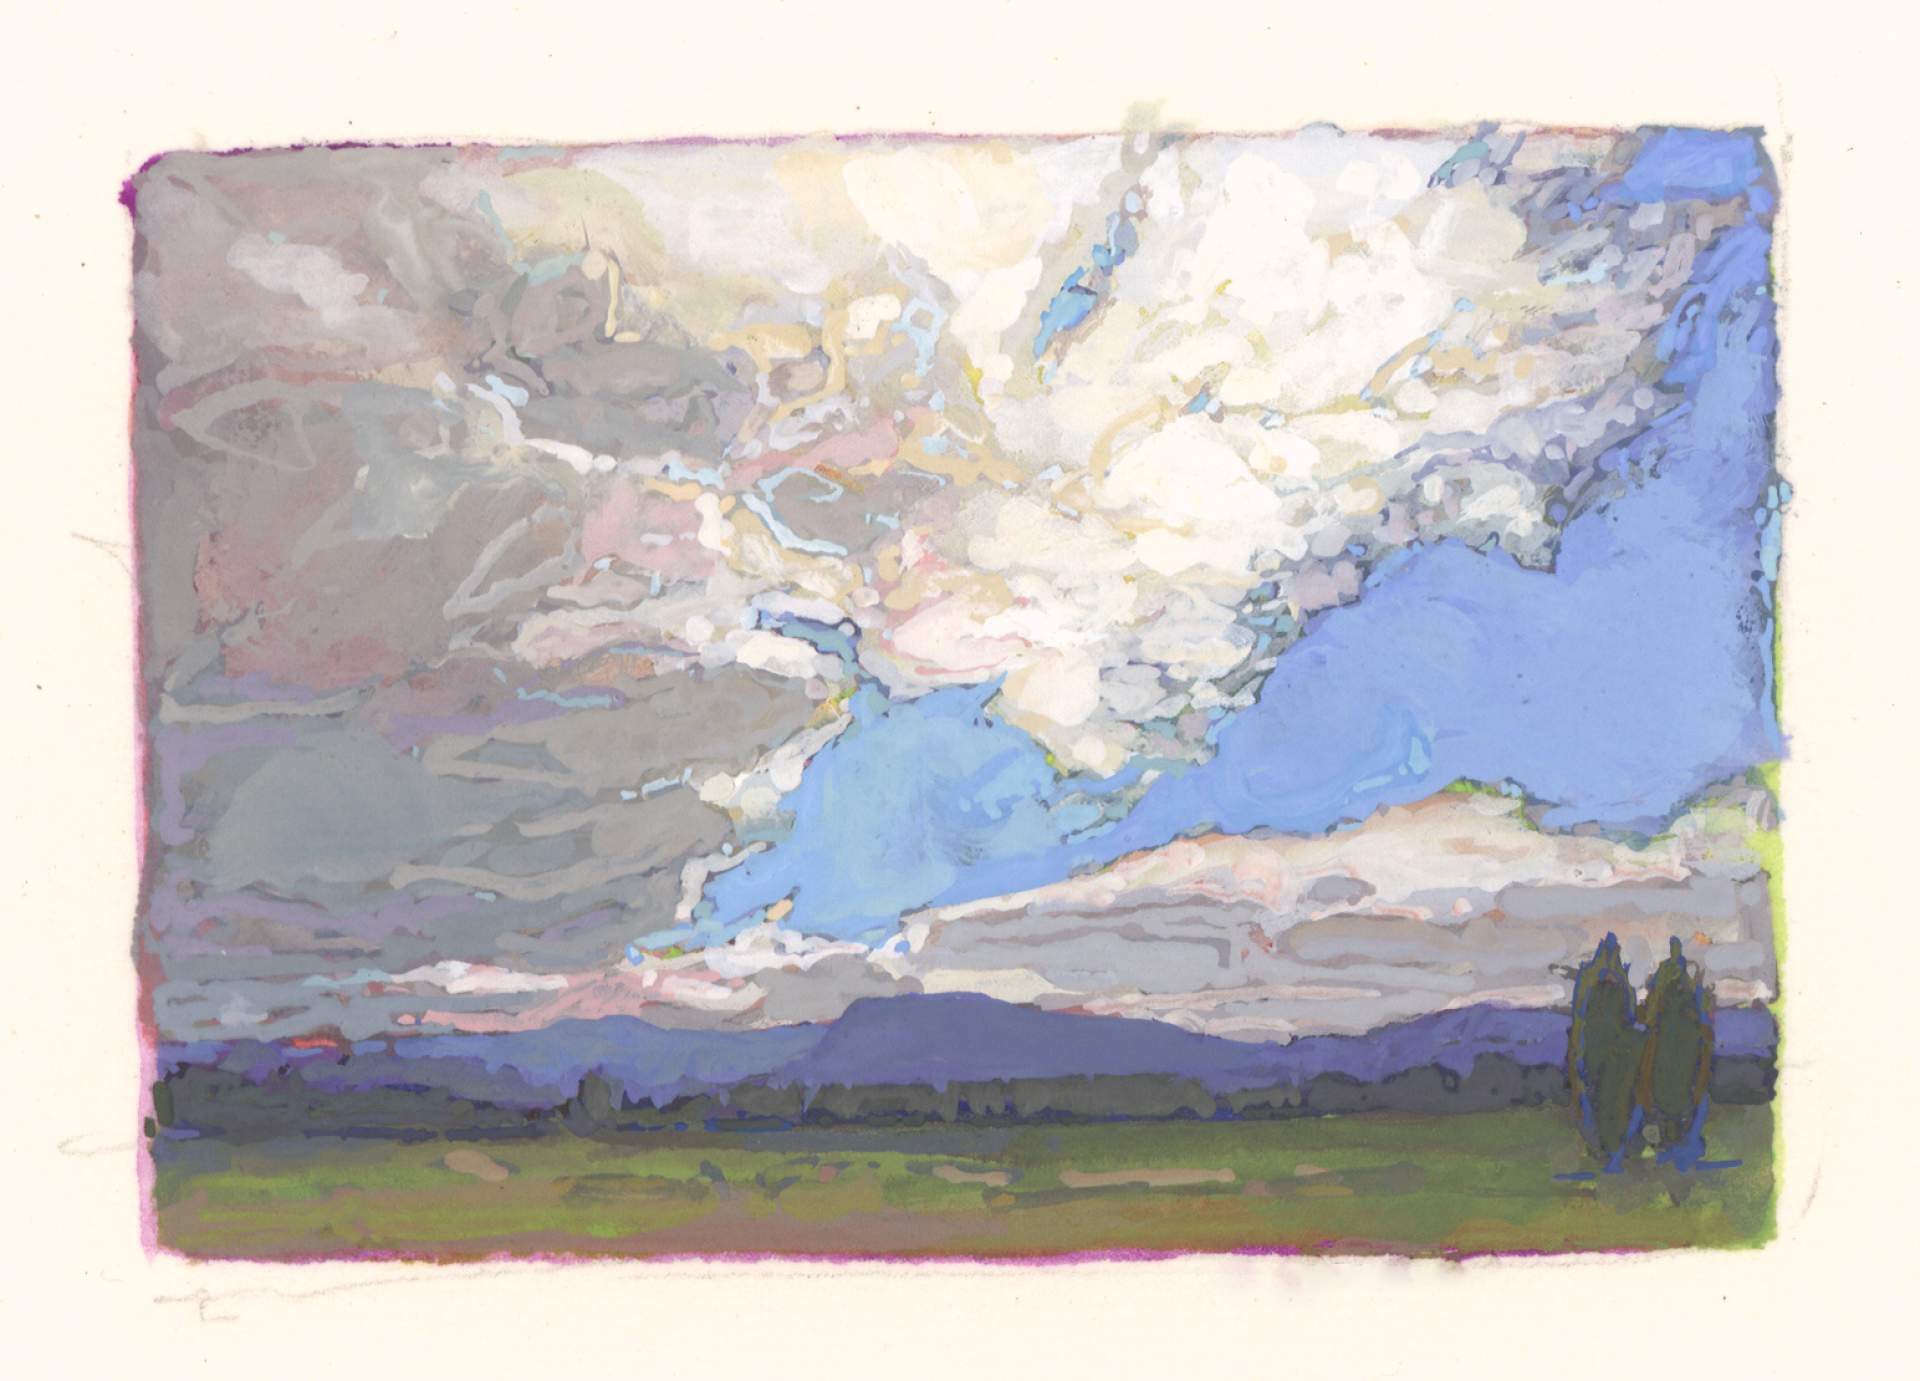 Dialogues in Gouache: with Thomas Paquette